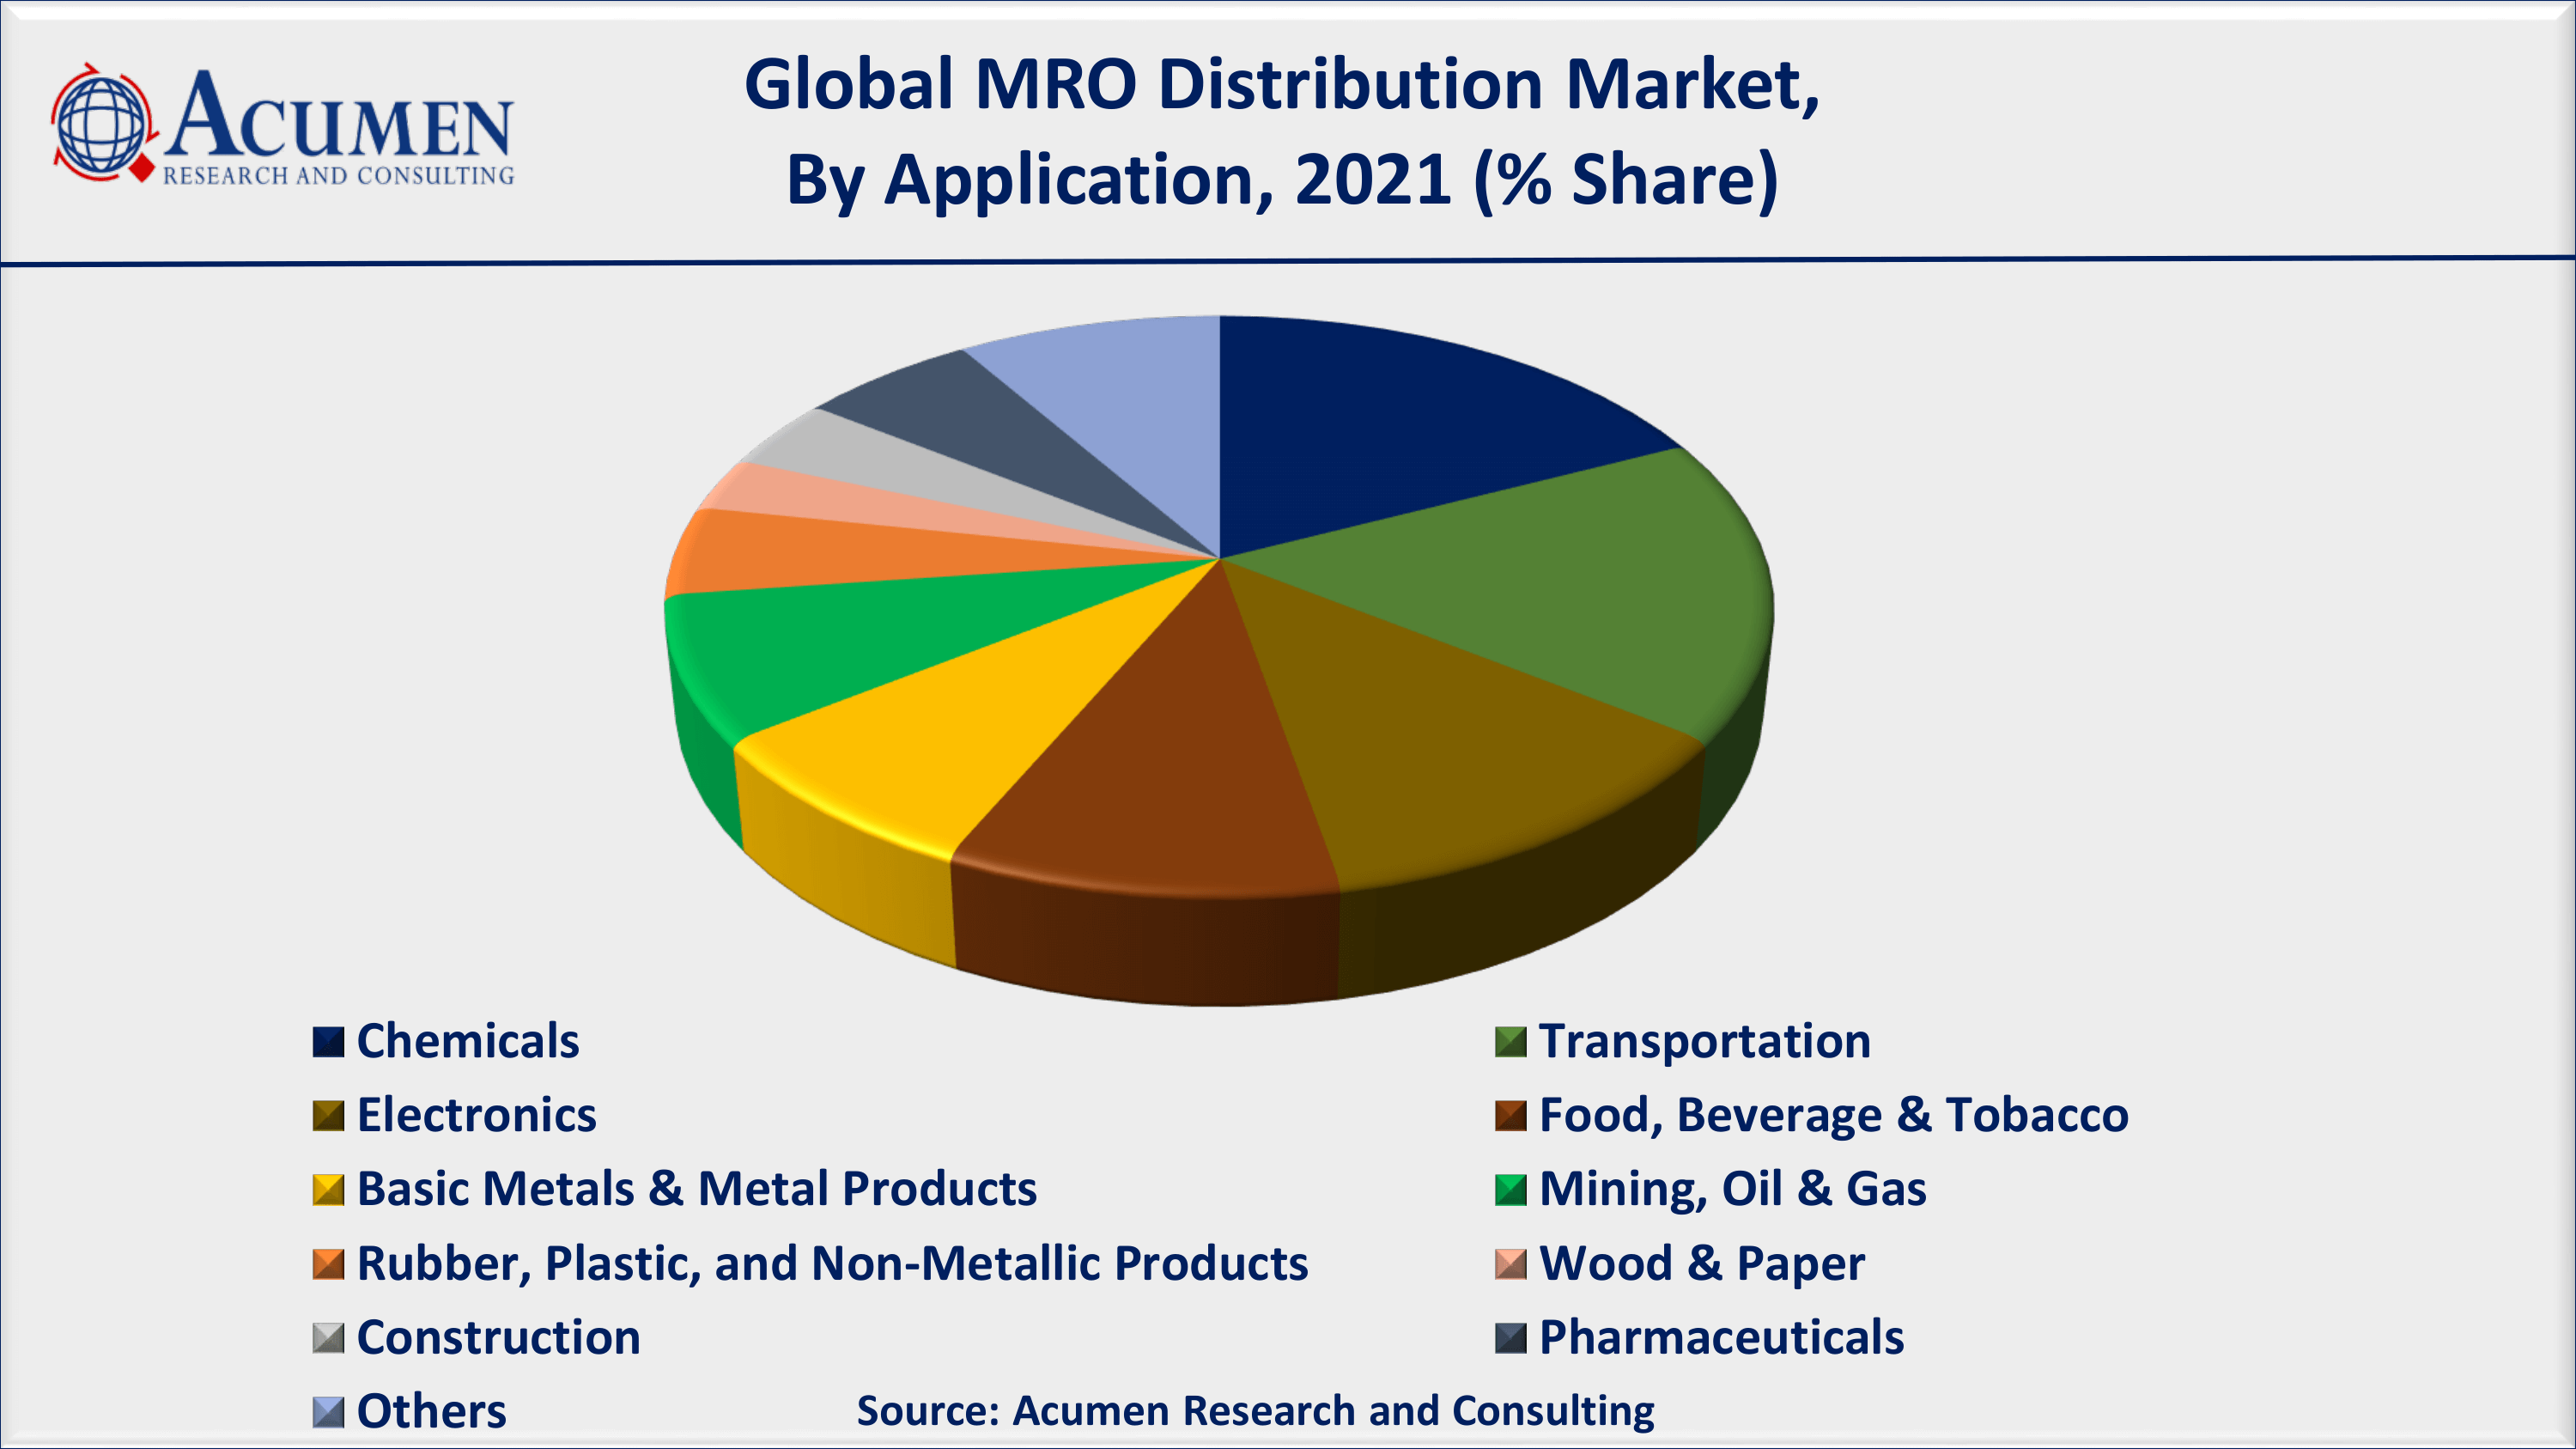 Based on application, chemicals accounted for over 18% of the overall market share in 2021